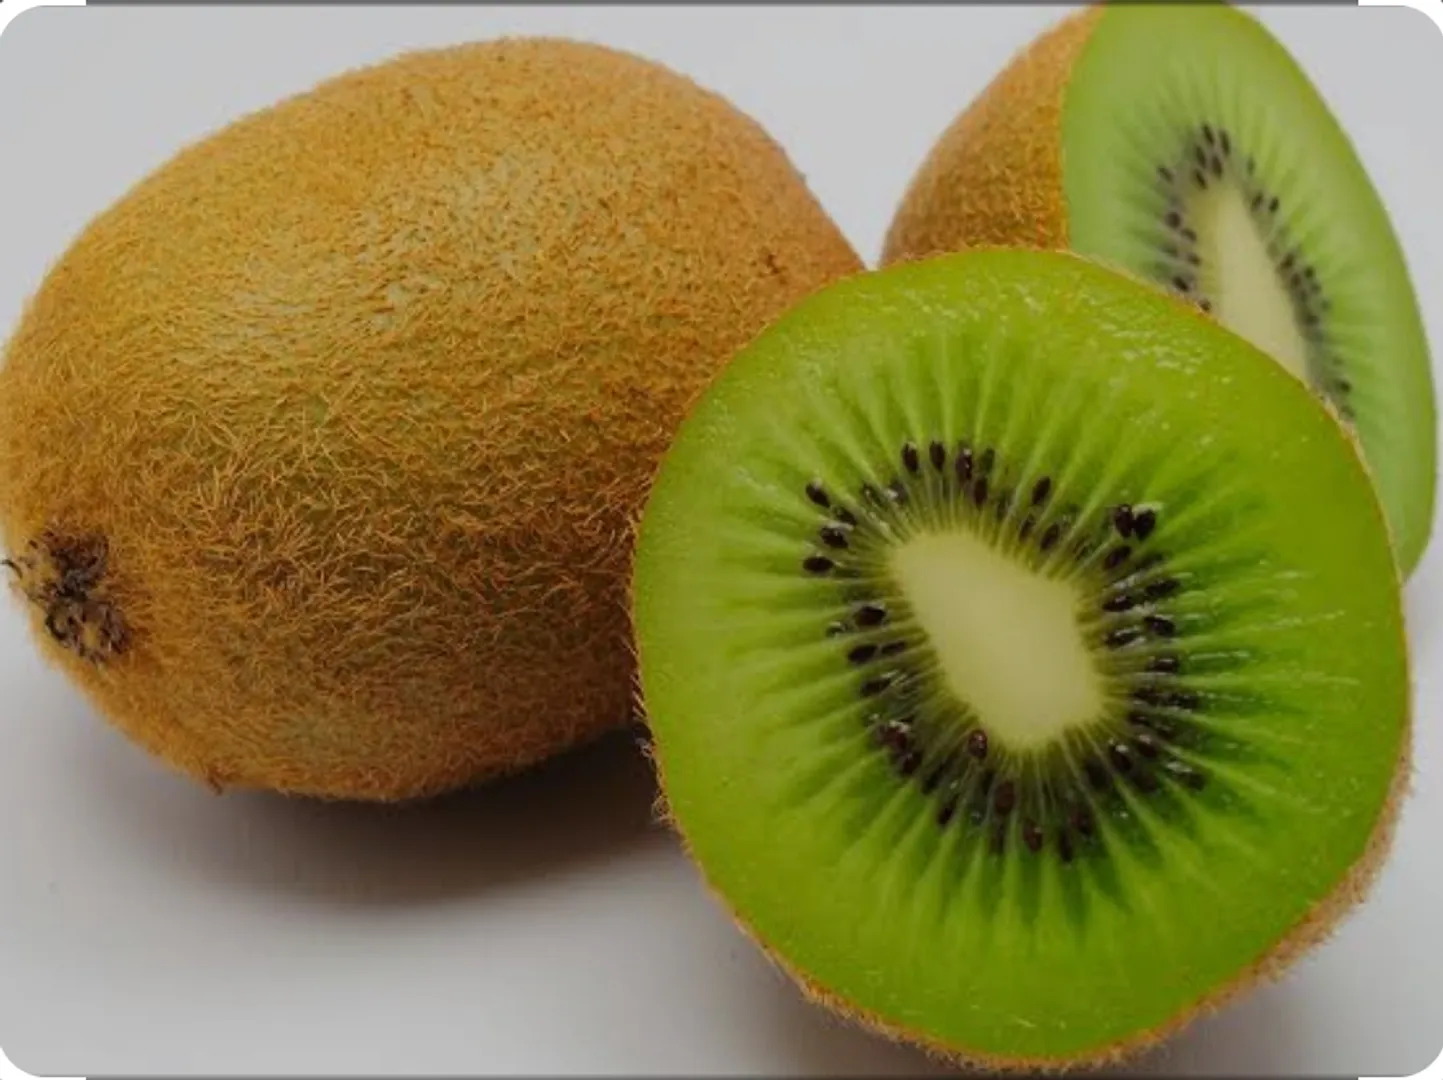 Kiwi: Vitamin C and Antioxidants Kiwi is another vitamin C-rich fruit that aids in collagen production. The antioxidants in kiwi help fight off oxidative stress, which can lead to premature aging. Including kiwi in your diet can promote elasticity and a youthful glow.